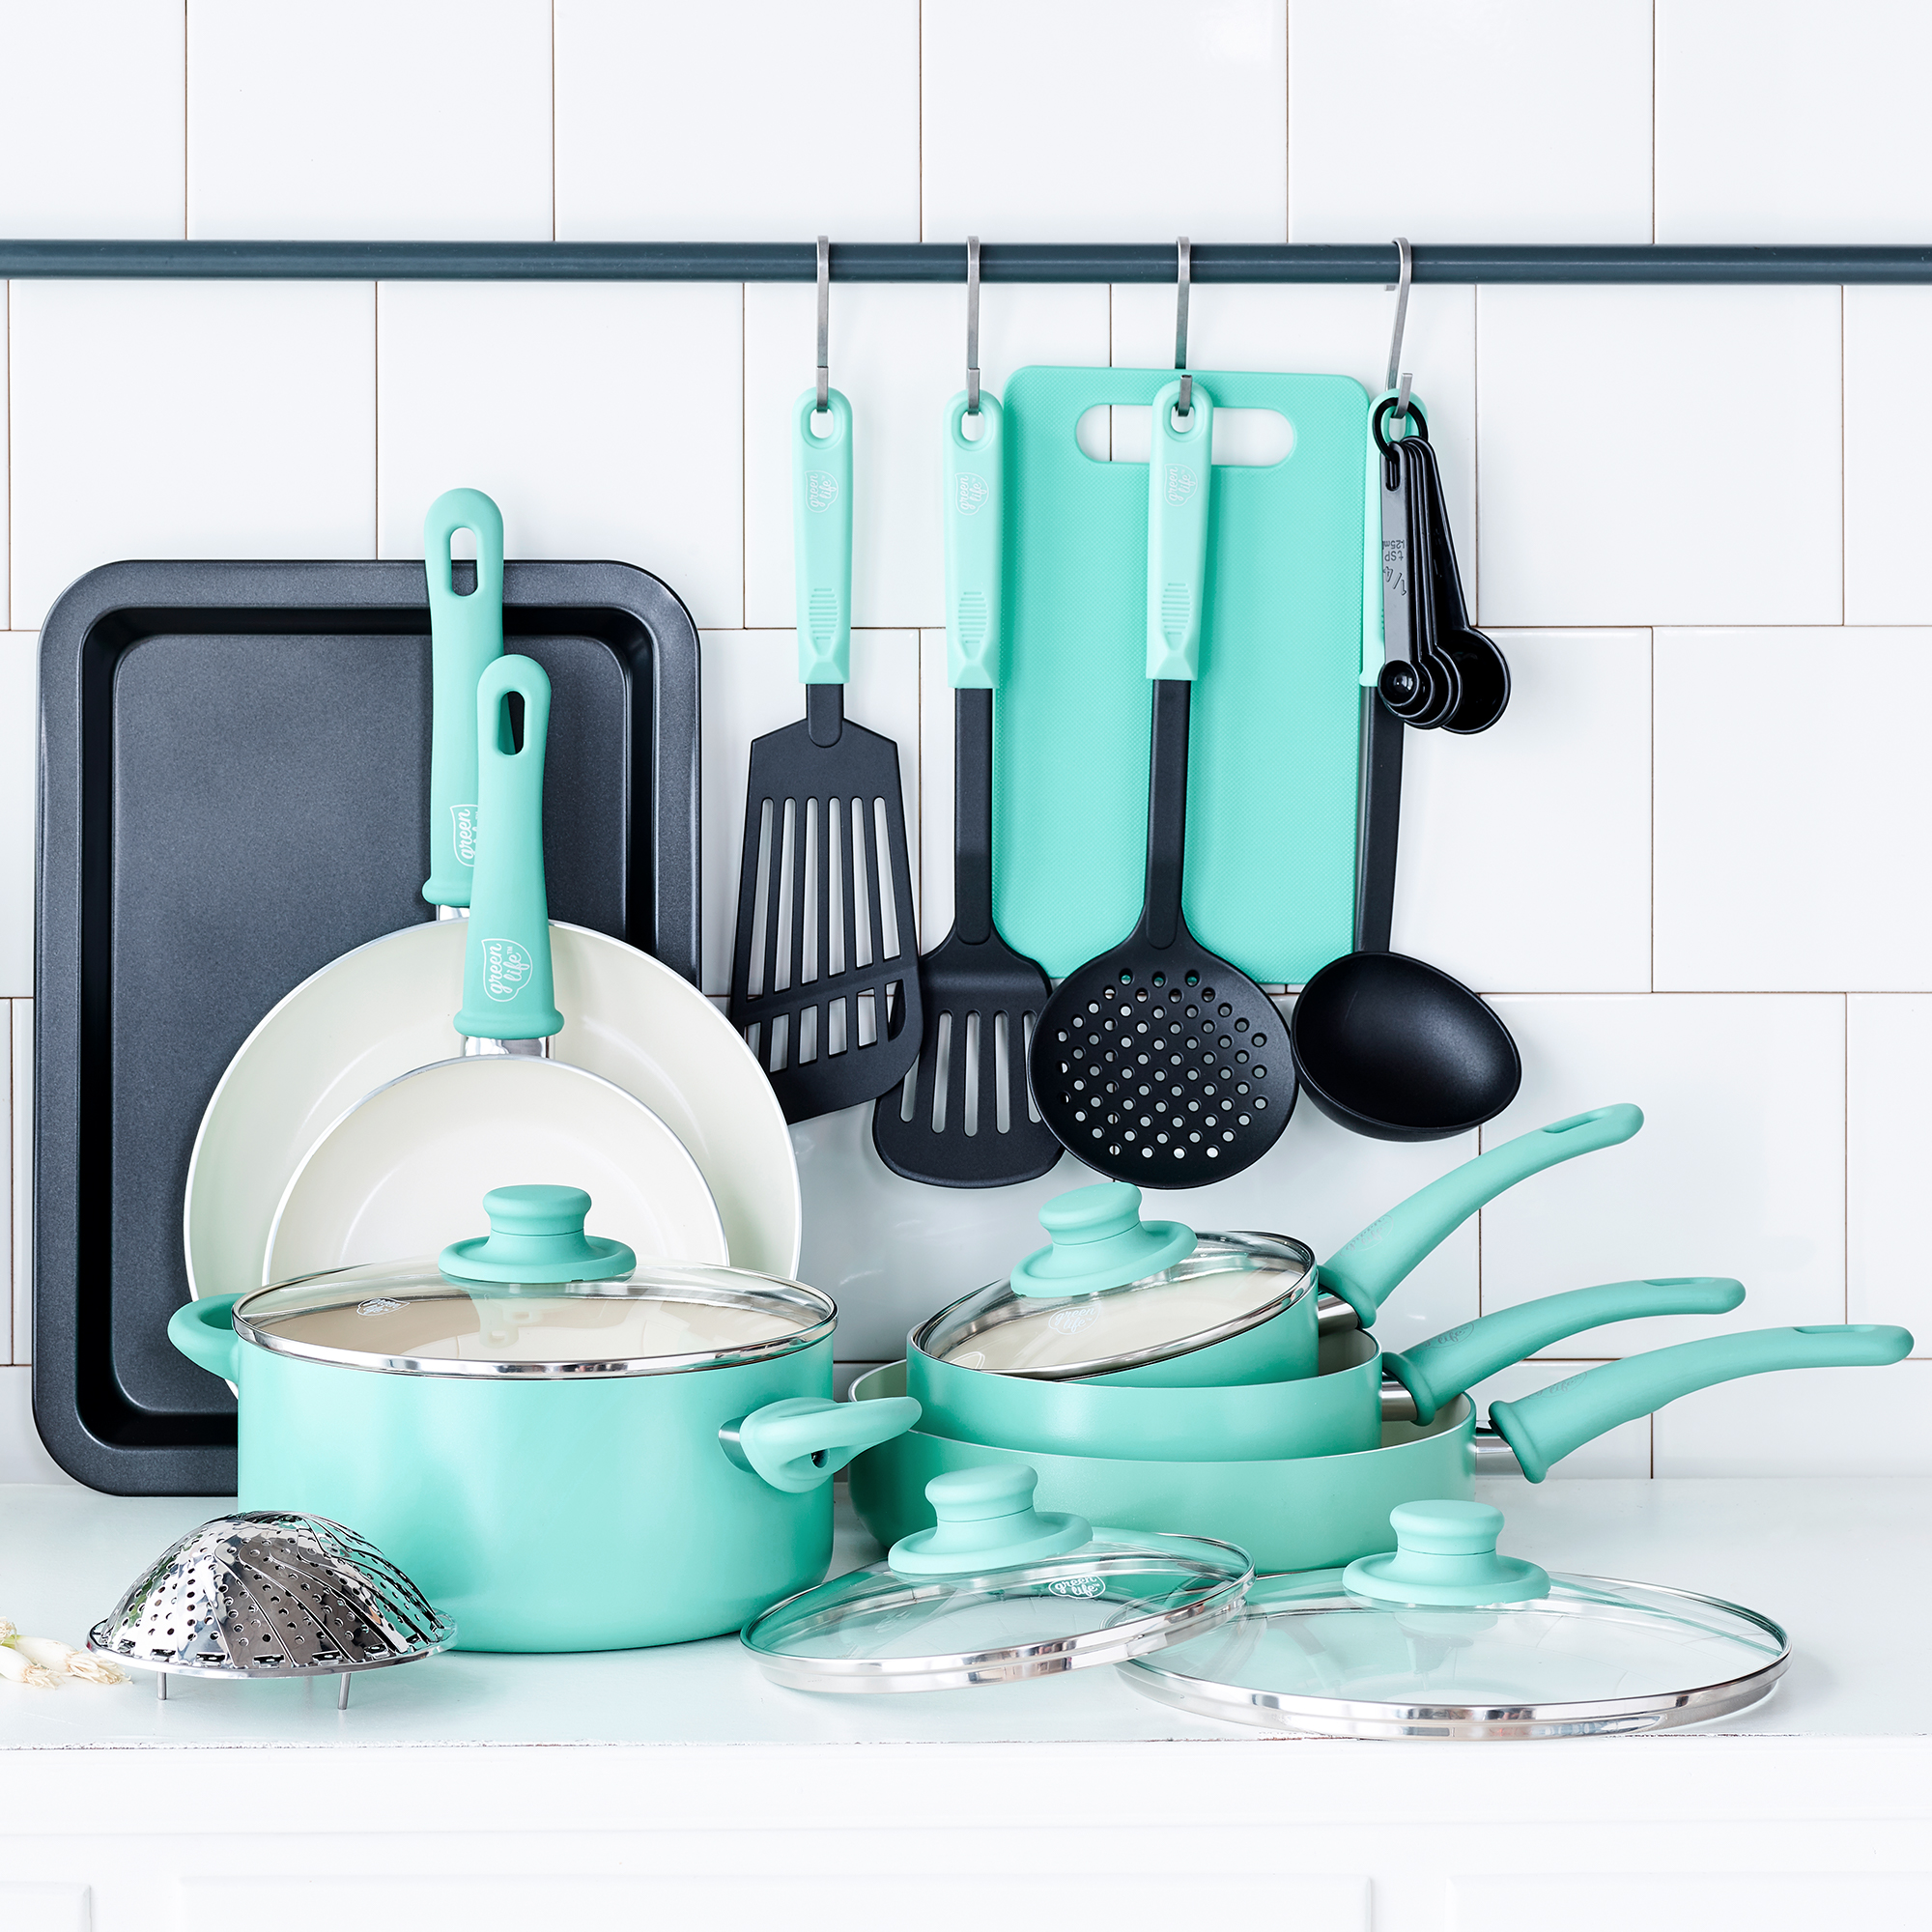 18-Piece GreenLife Soft Grip Toxin-Free Non-stick Cookware Set only $59.00